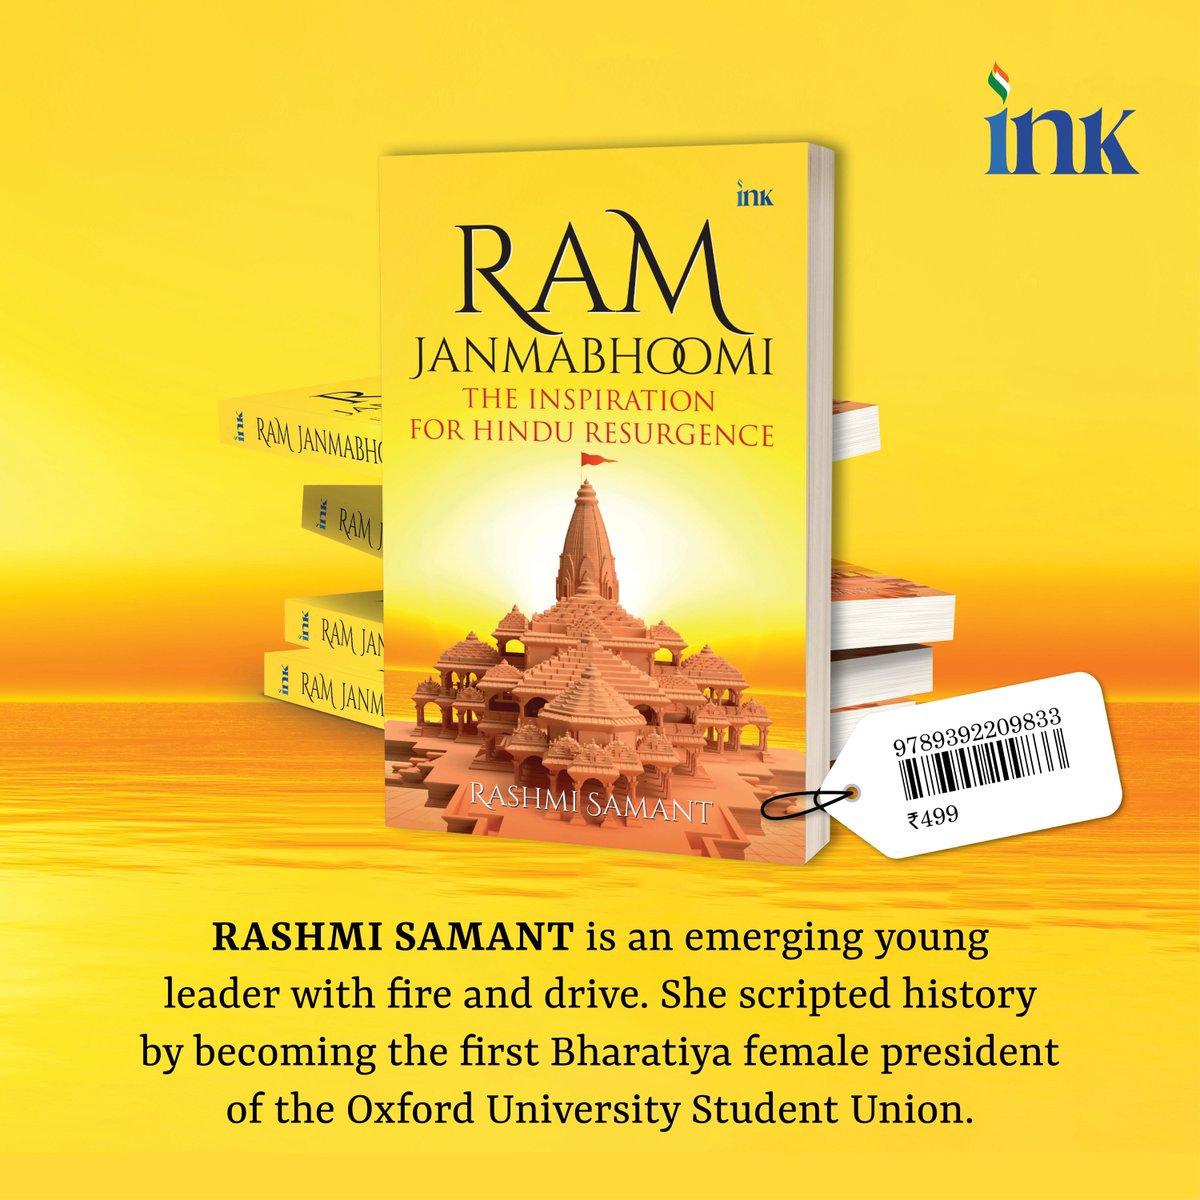 On this auspicious Ram Navami, explore the enduring legacy of Lord Rama’s birthplace through the pages of ‘Ram Janmabhoomi: The Inspiration for Hindu Resurgence,’ authored by @RashmiDVS. Get your copy today amzn.in/d/6ixbTrD #ramnavami #jaishreeram #festival #ayodhya